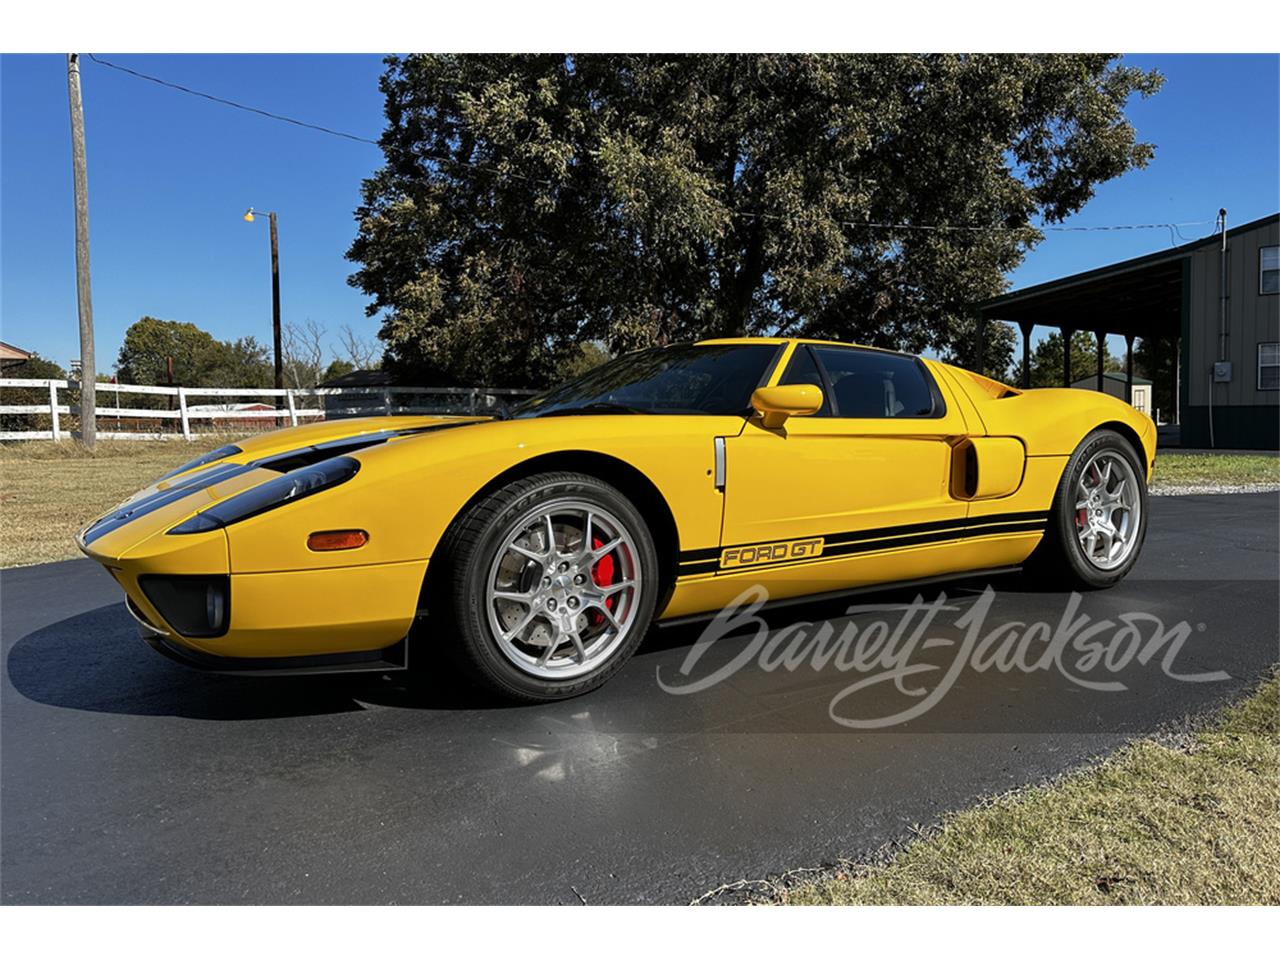 For Sale at Auction: 2006 Ford GT in Scottsdale, Arizona for sale in Scottsdale, AZ